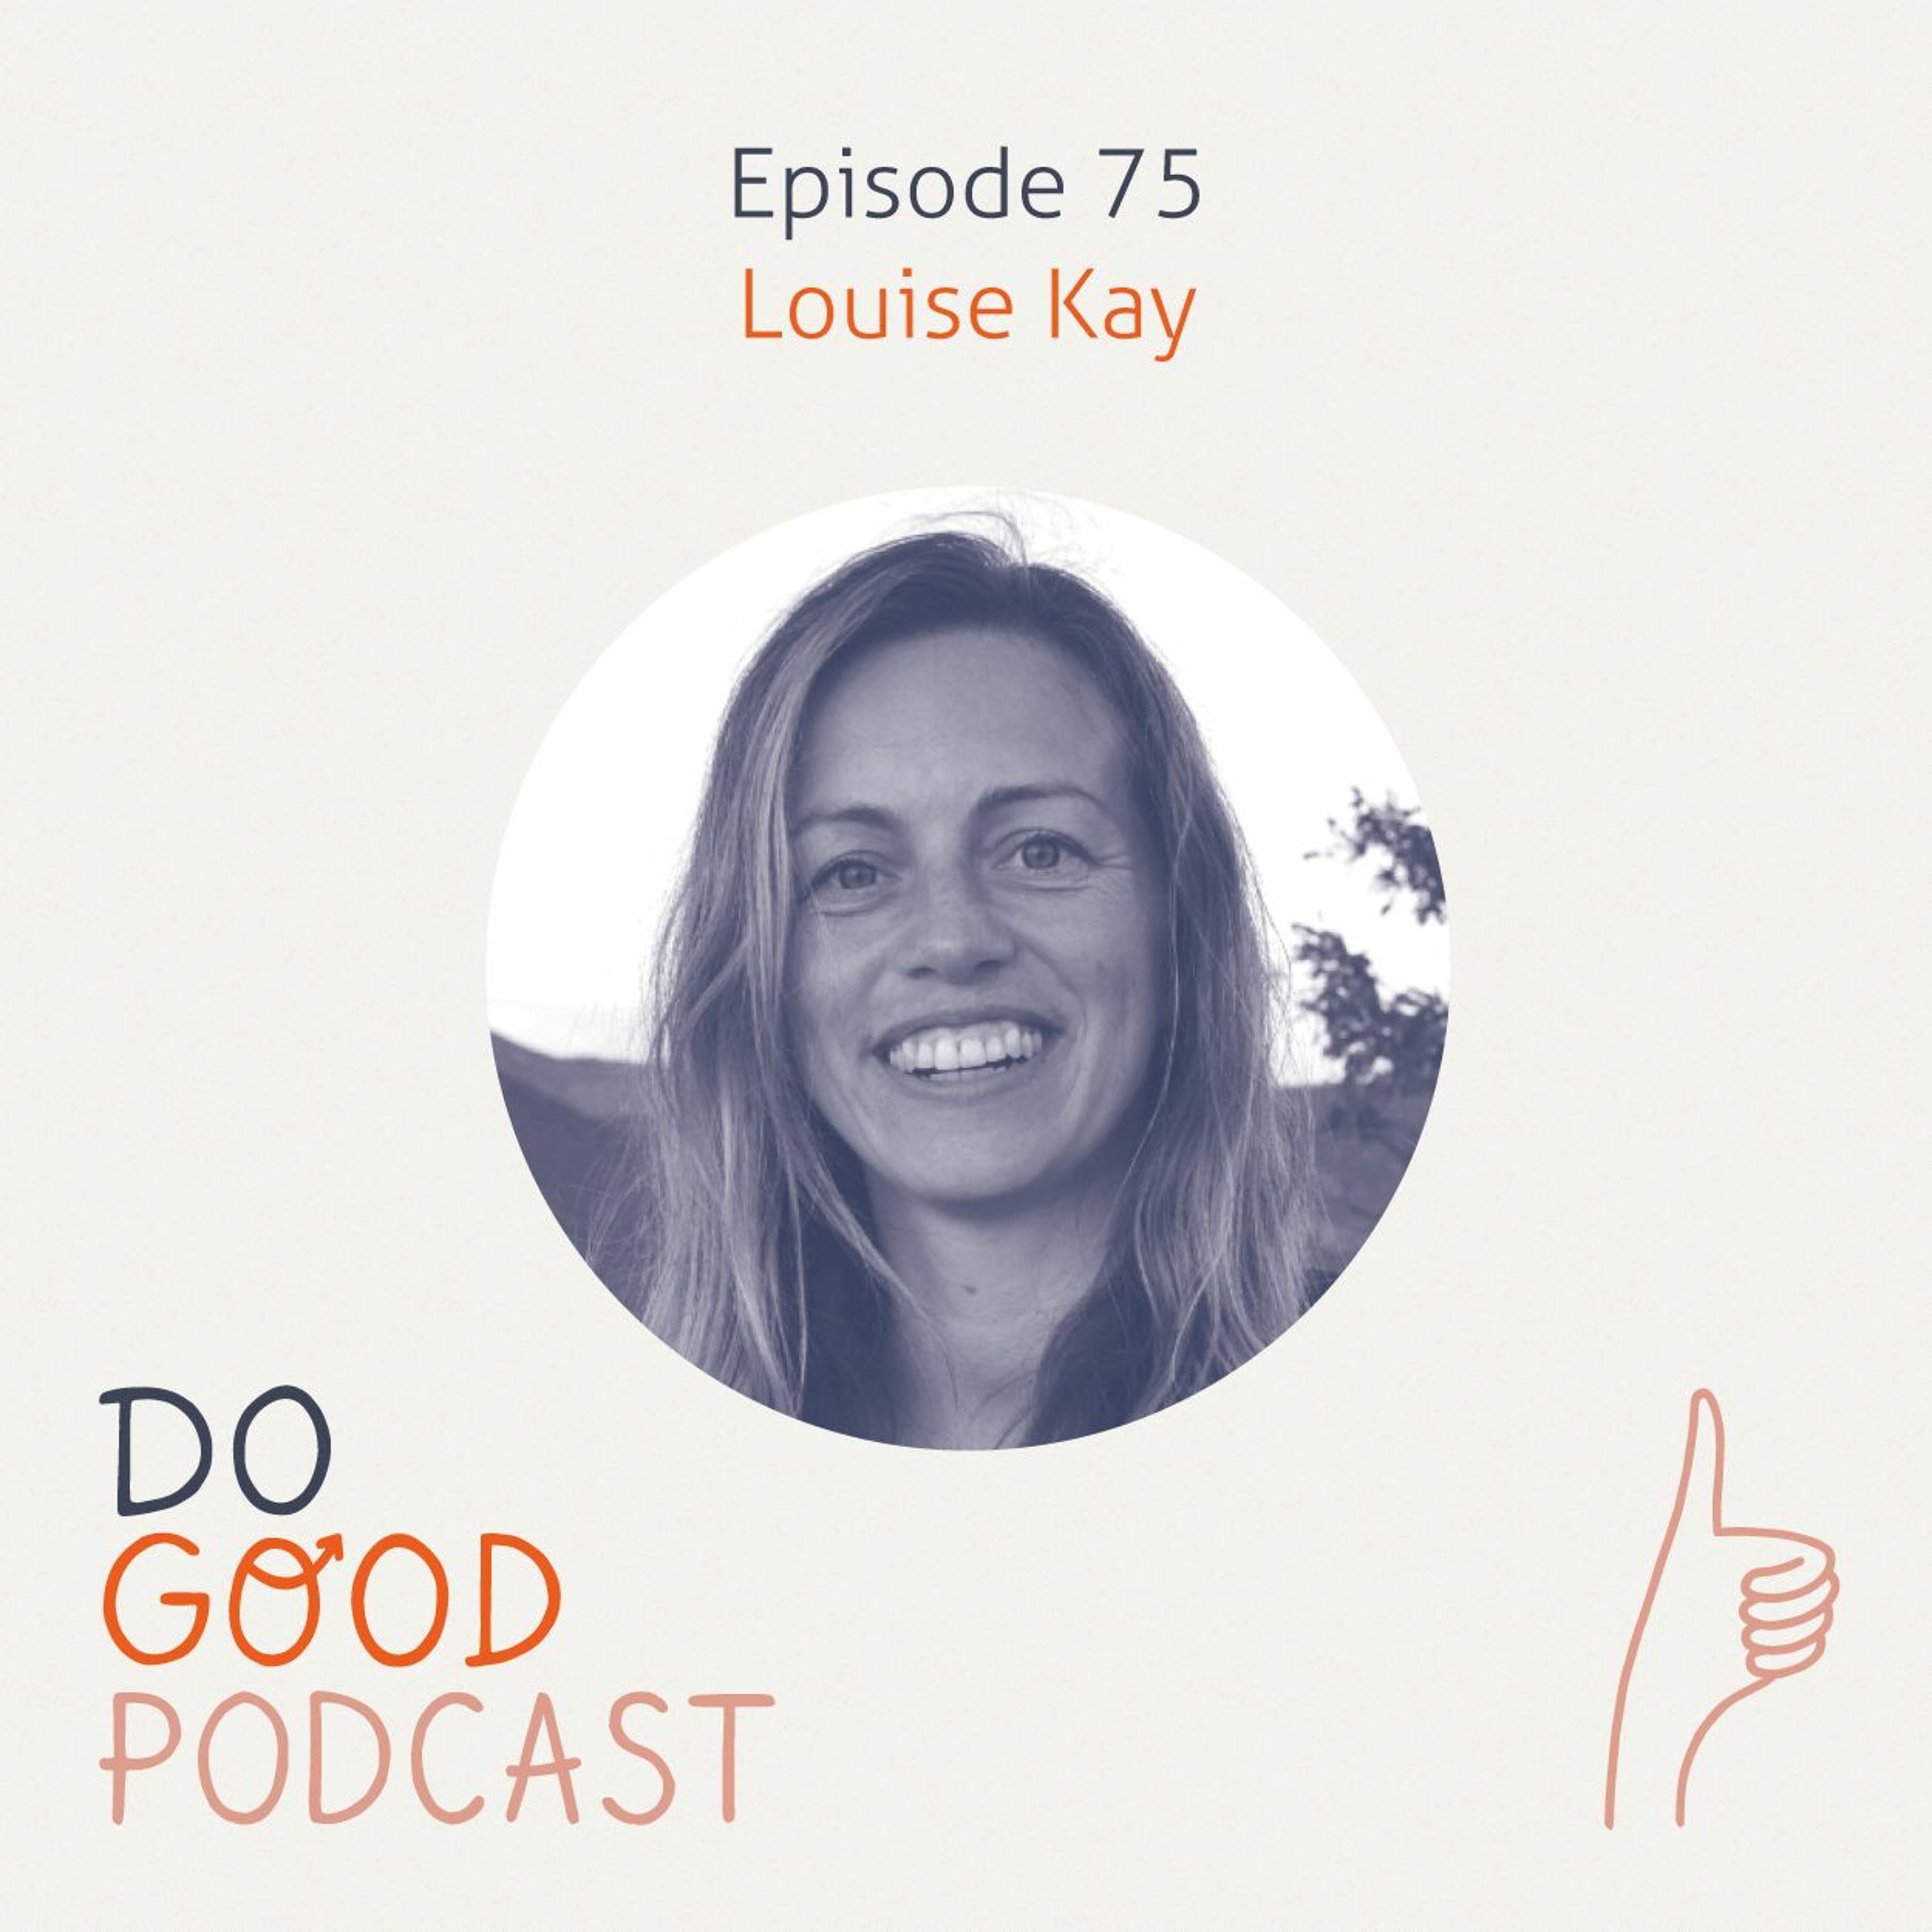 Ep 75: Louise Kay (Spiritual Teacher) on living in the present moment